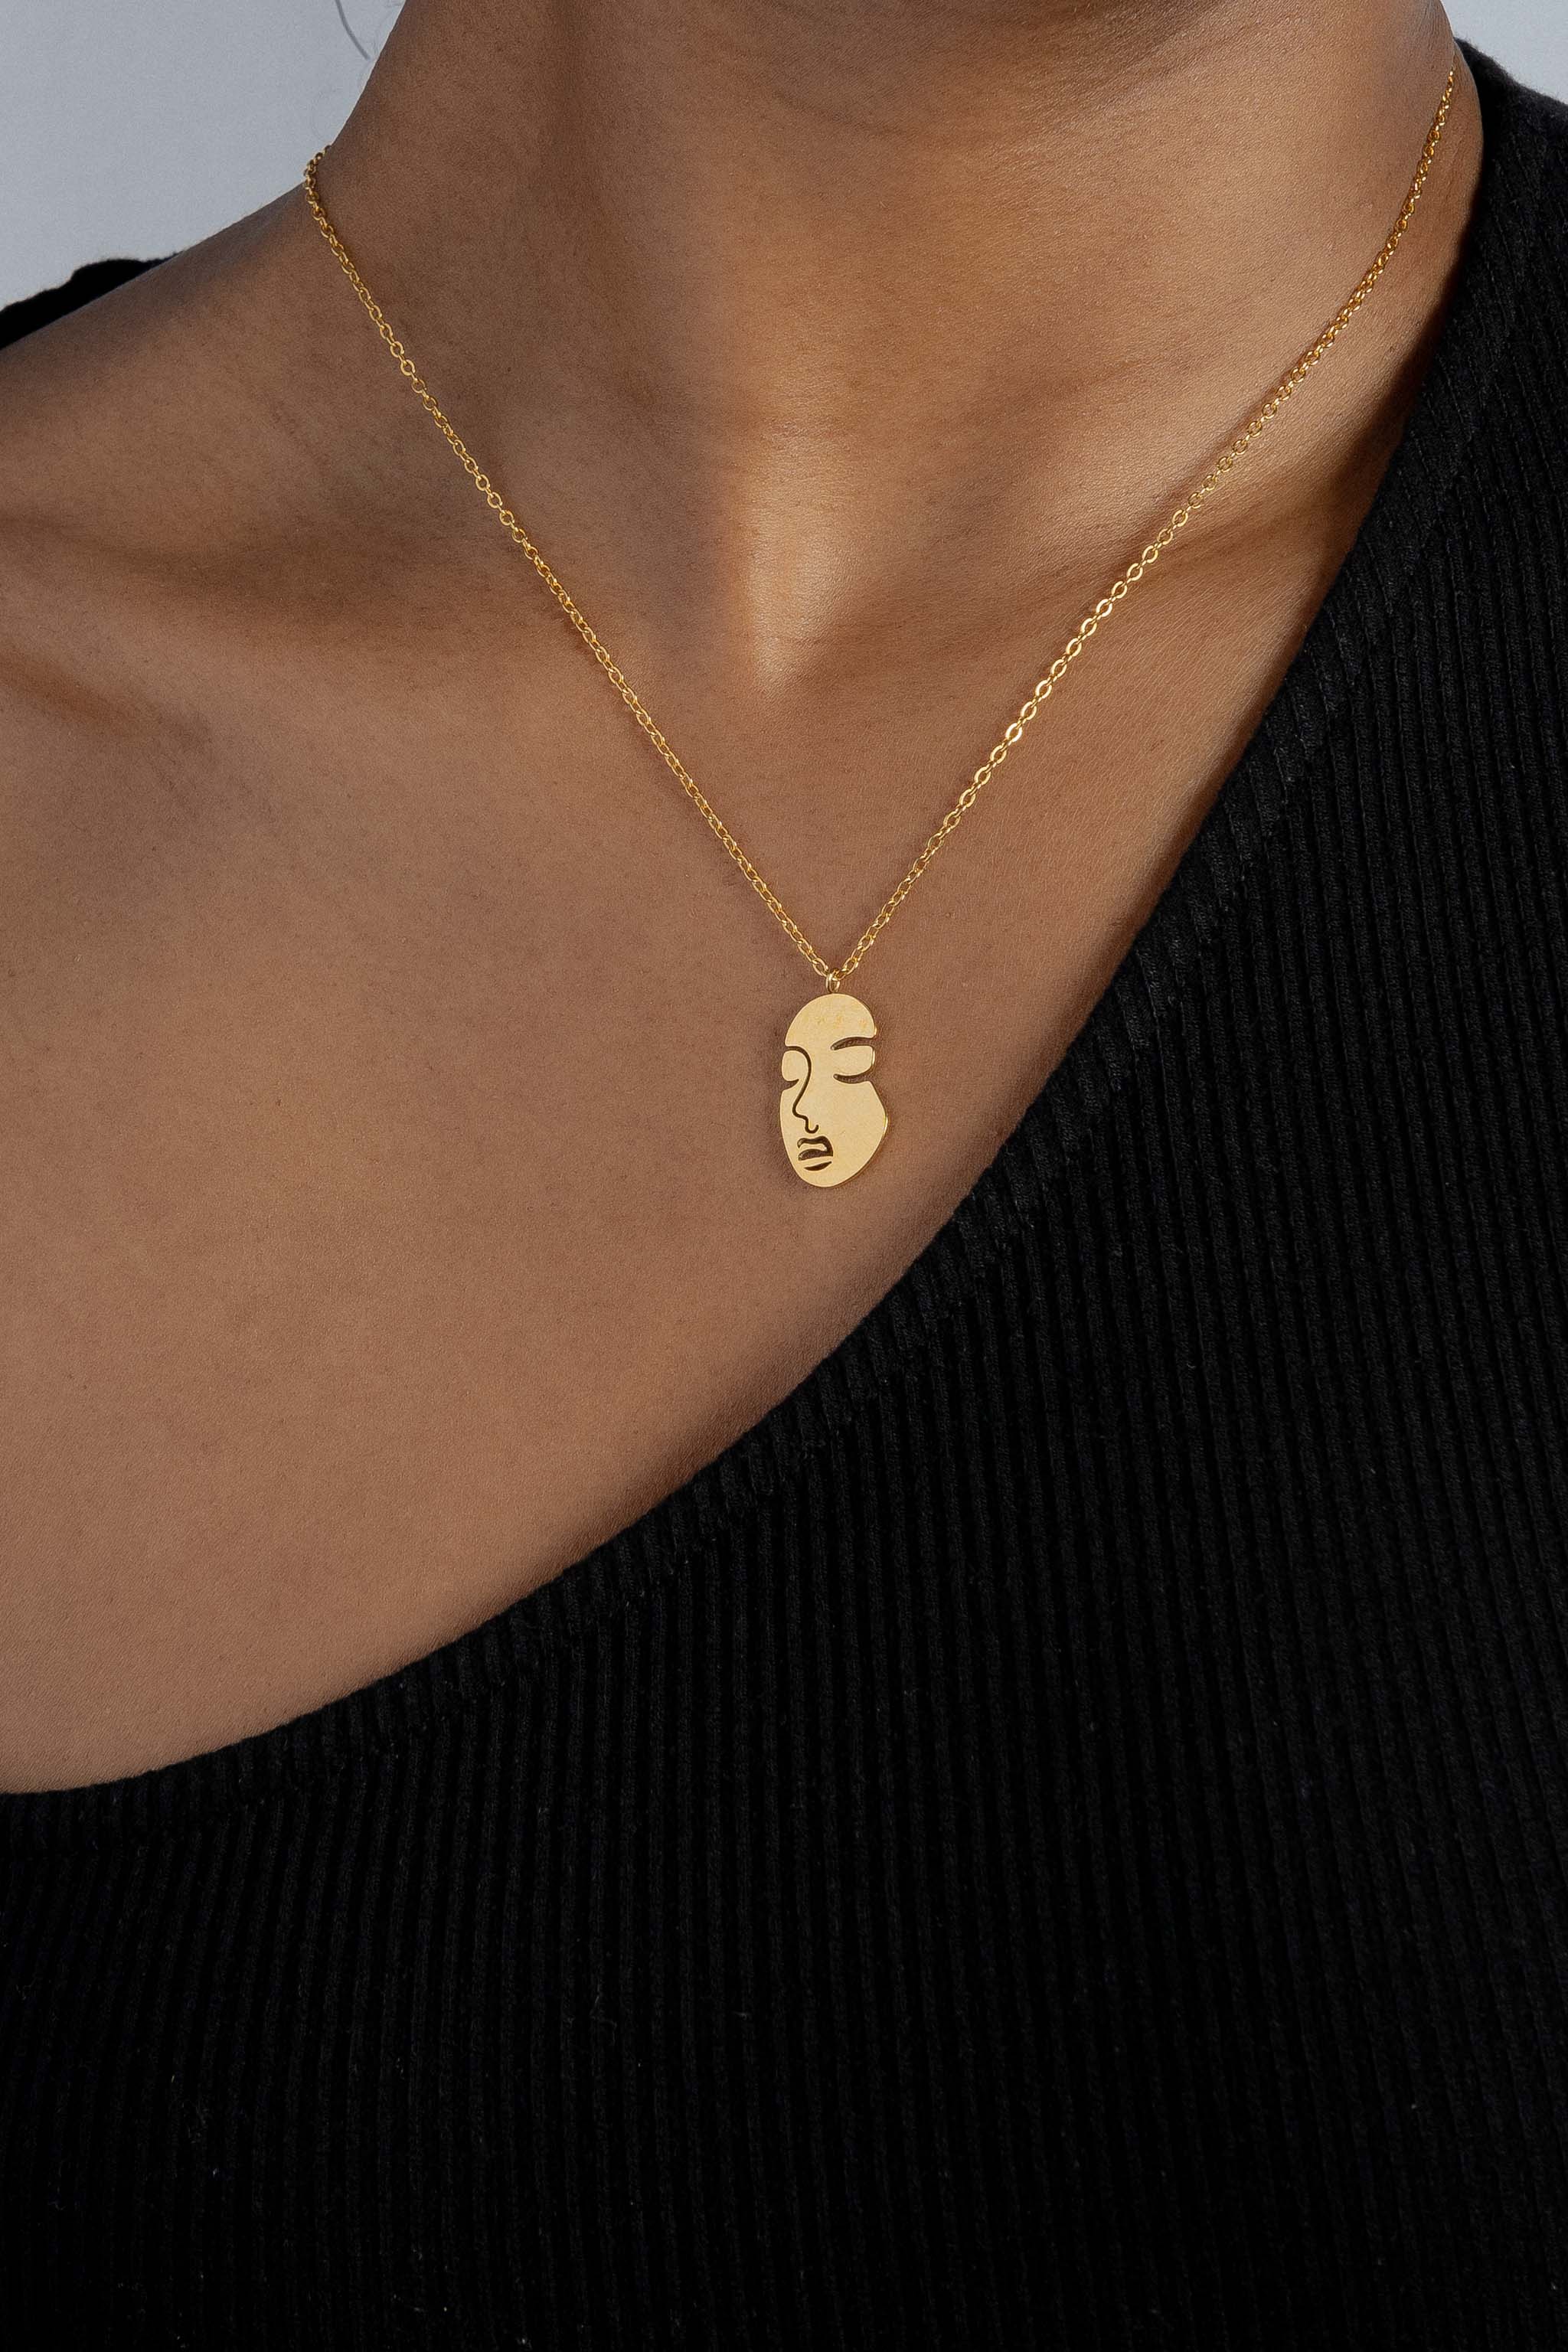 Serenity Necklace with Simple Chain - Gold